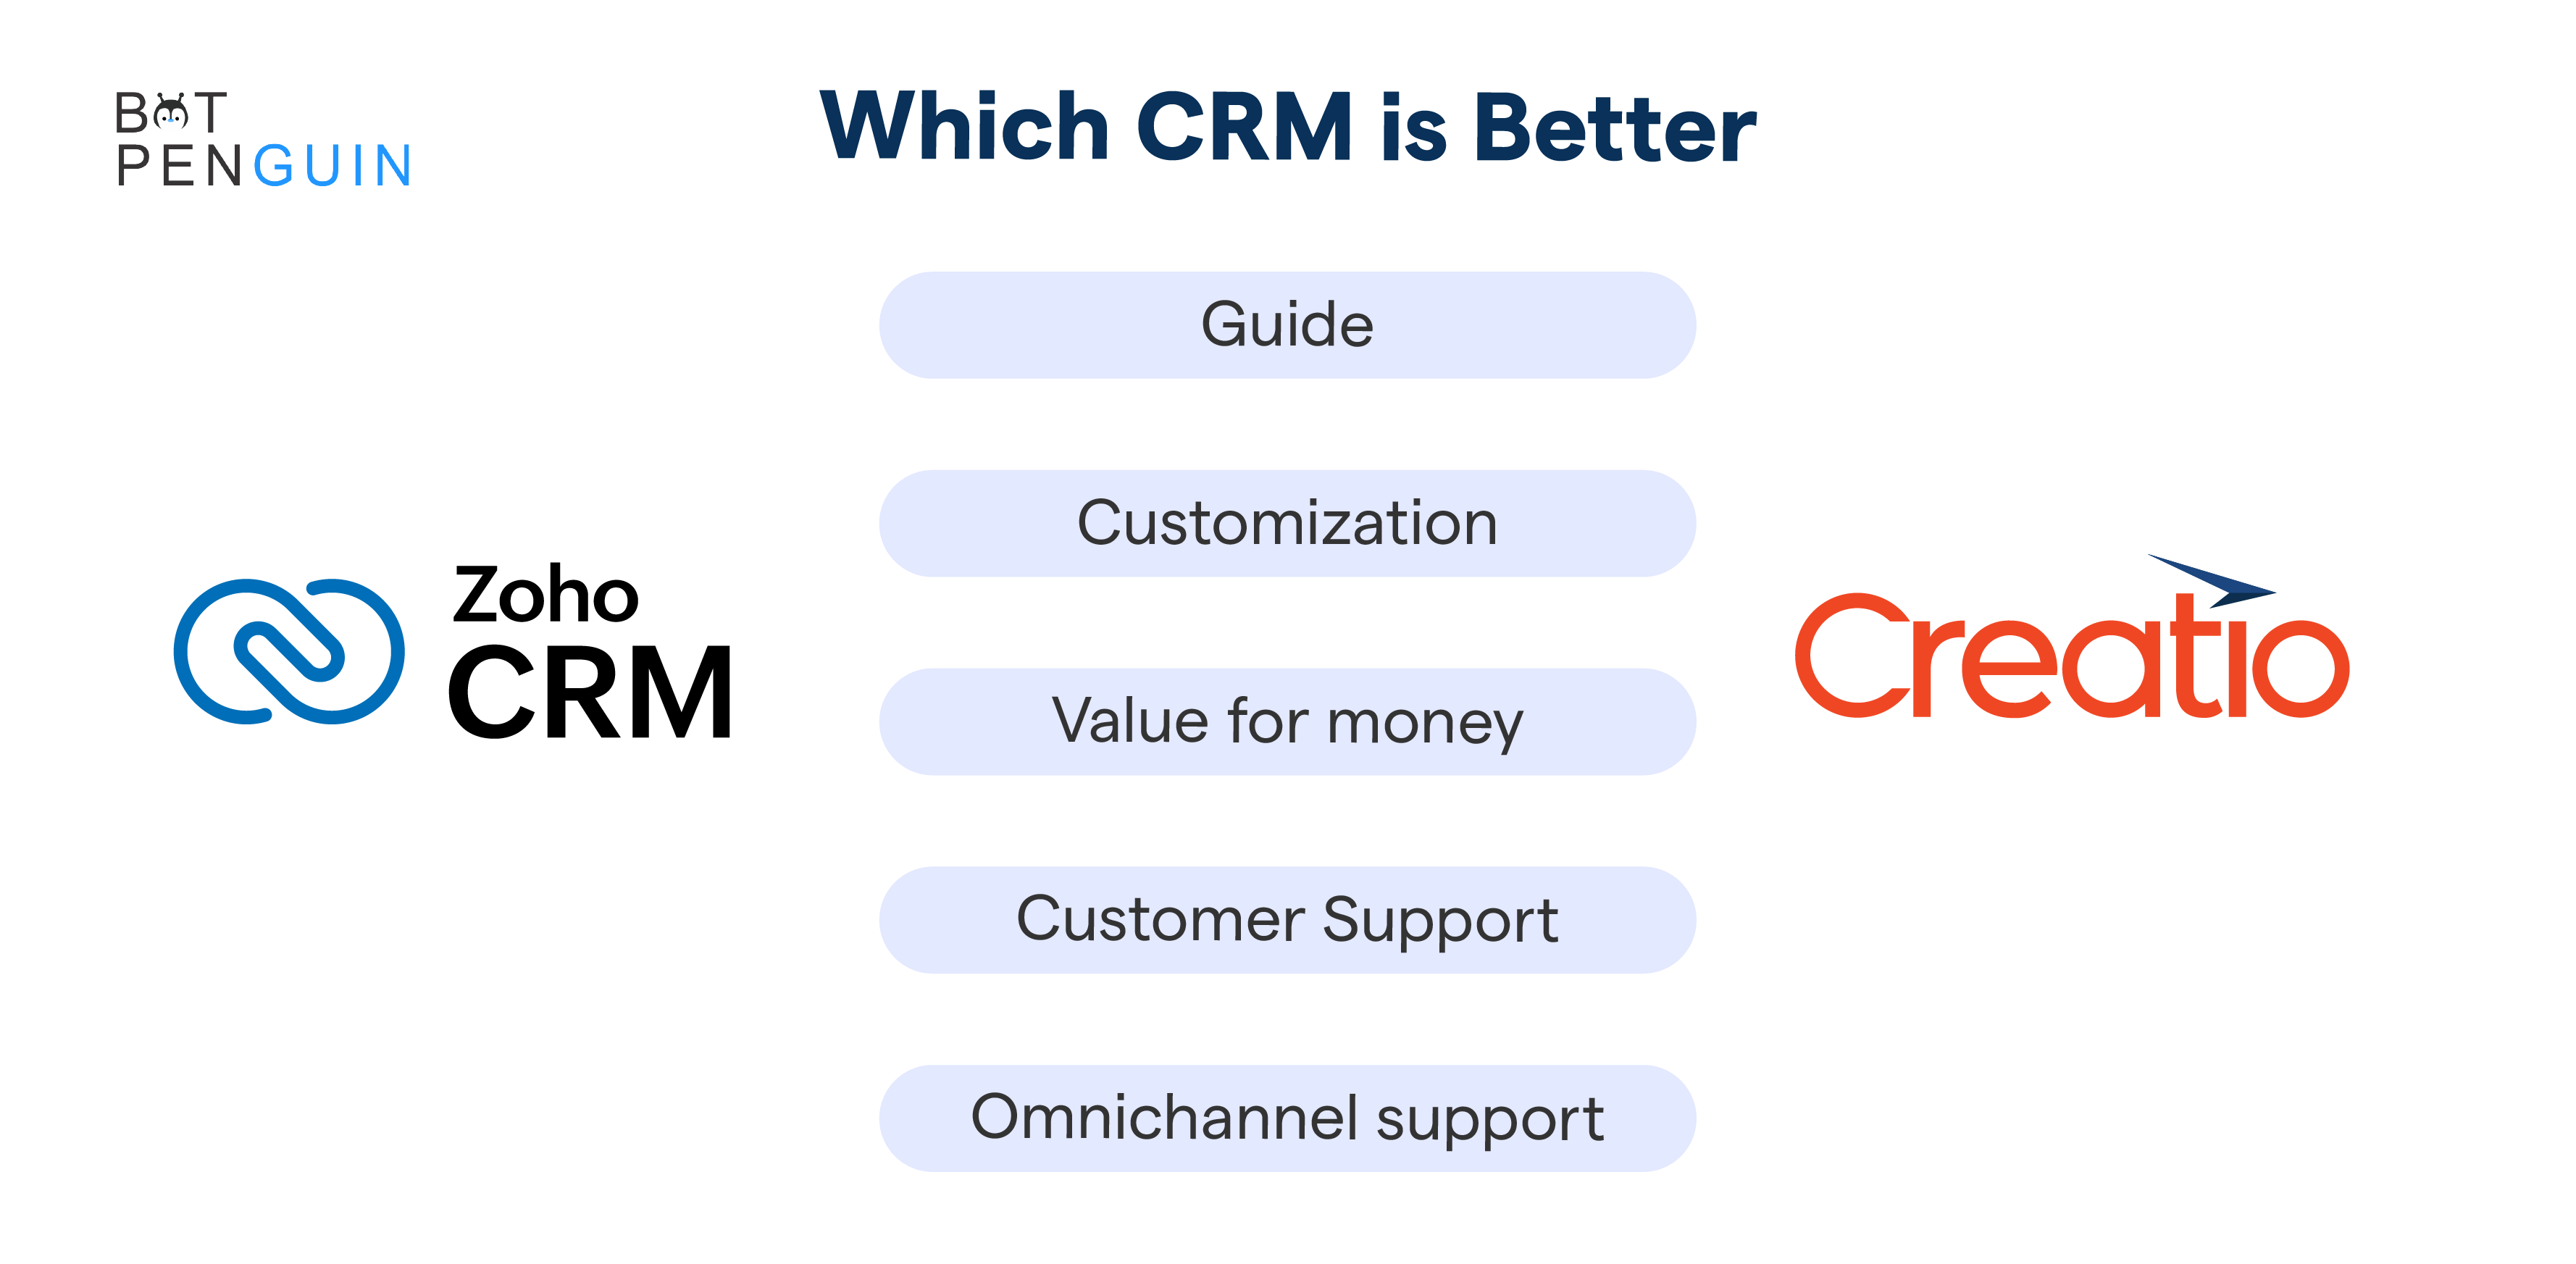 Zoho CRM VS Creatio: Which CRM is Better ?